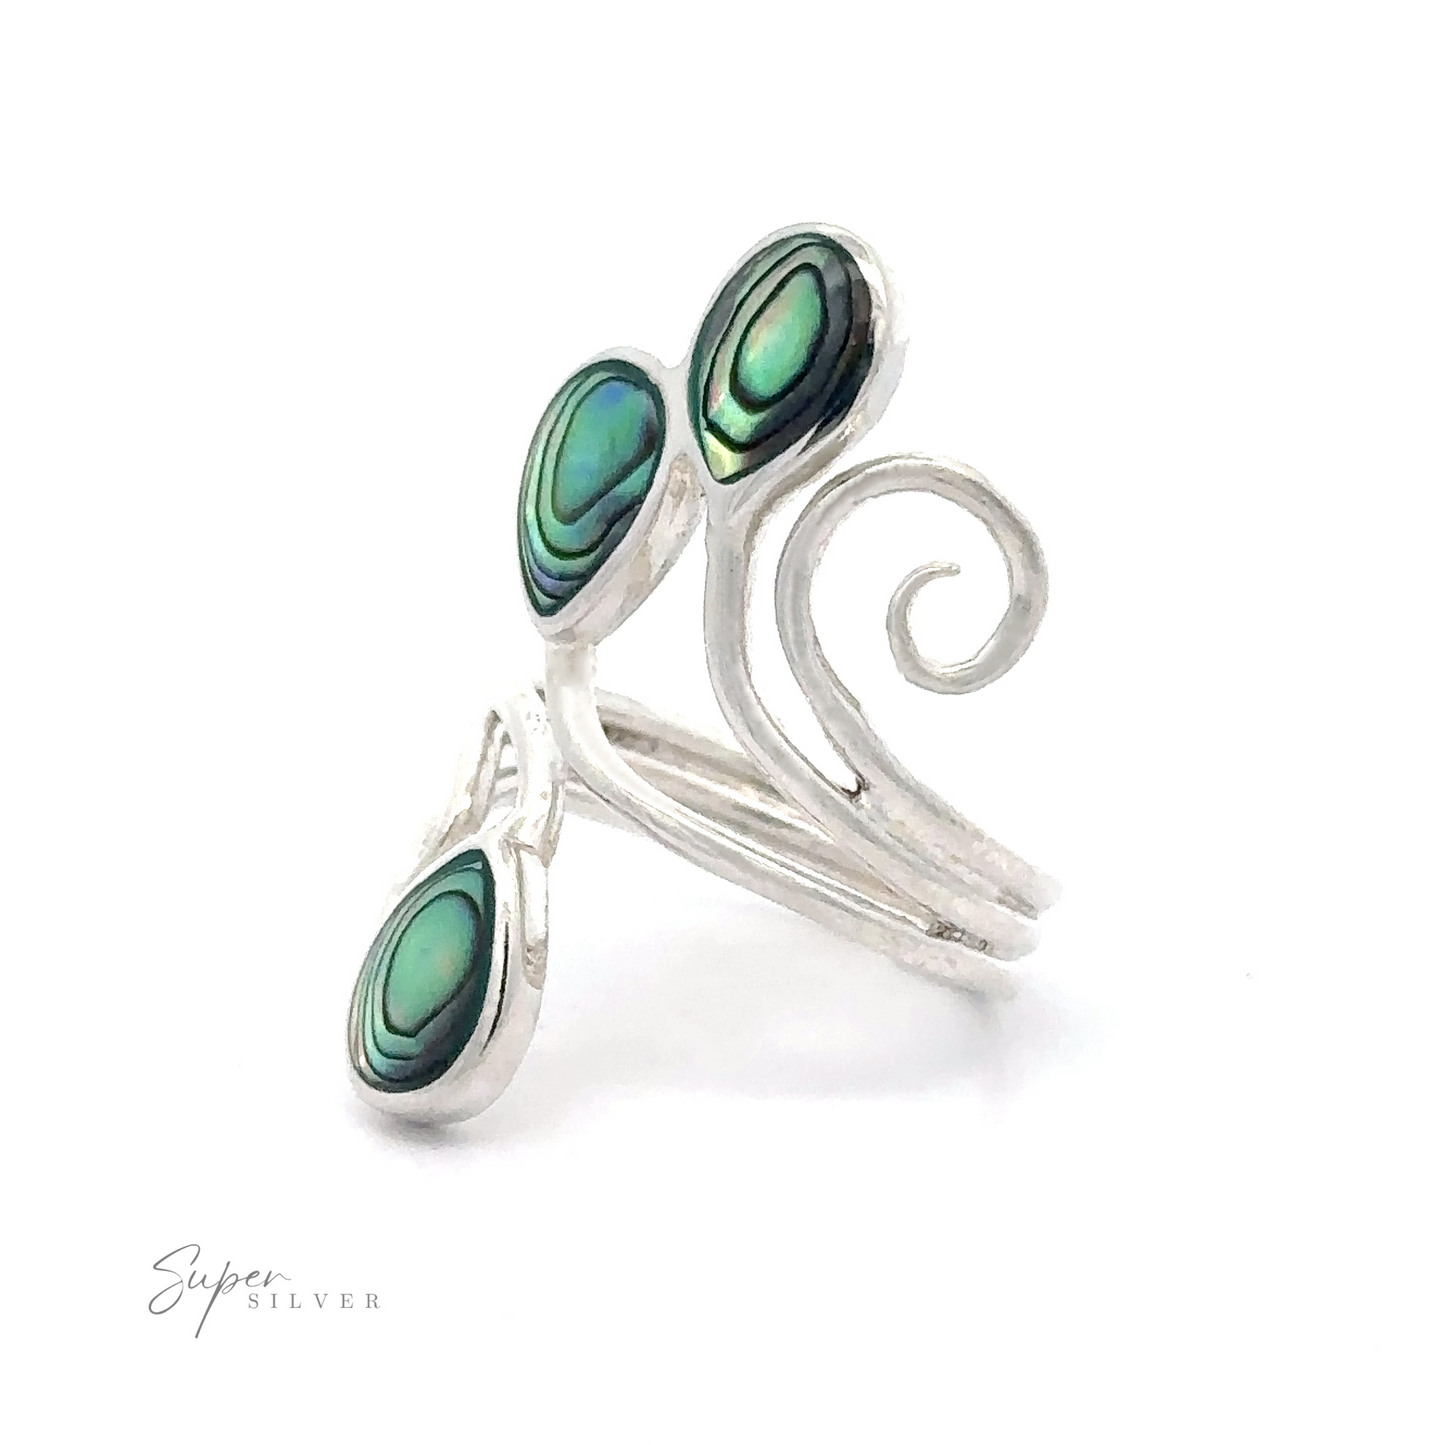 A Swirl Freeform Abalone Ring with three abalone shell inlays displayed against a white background.